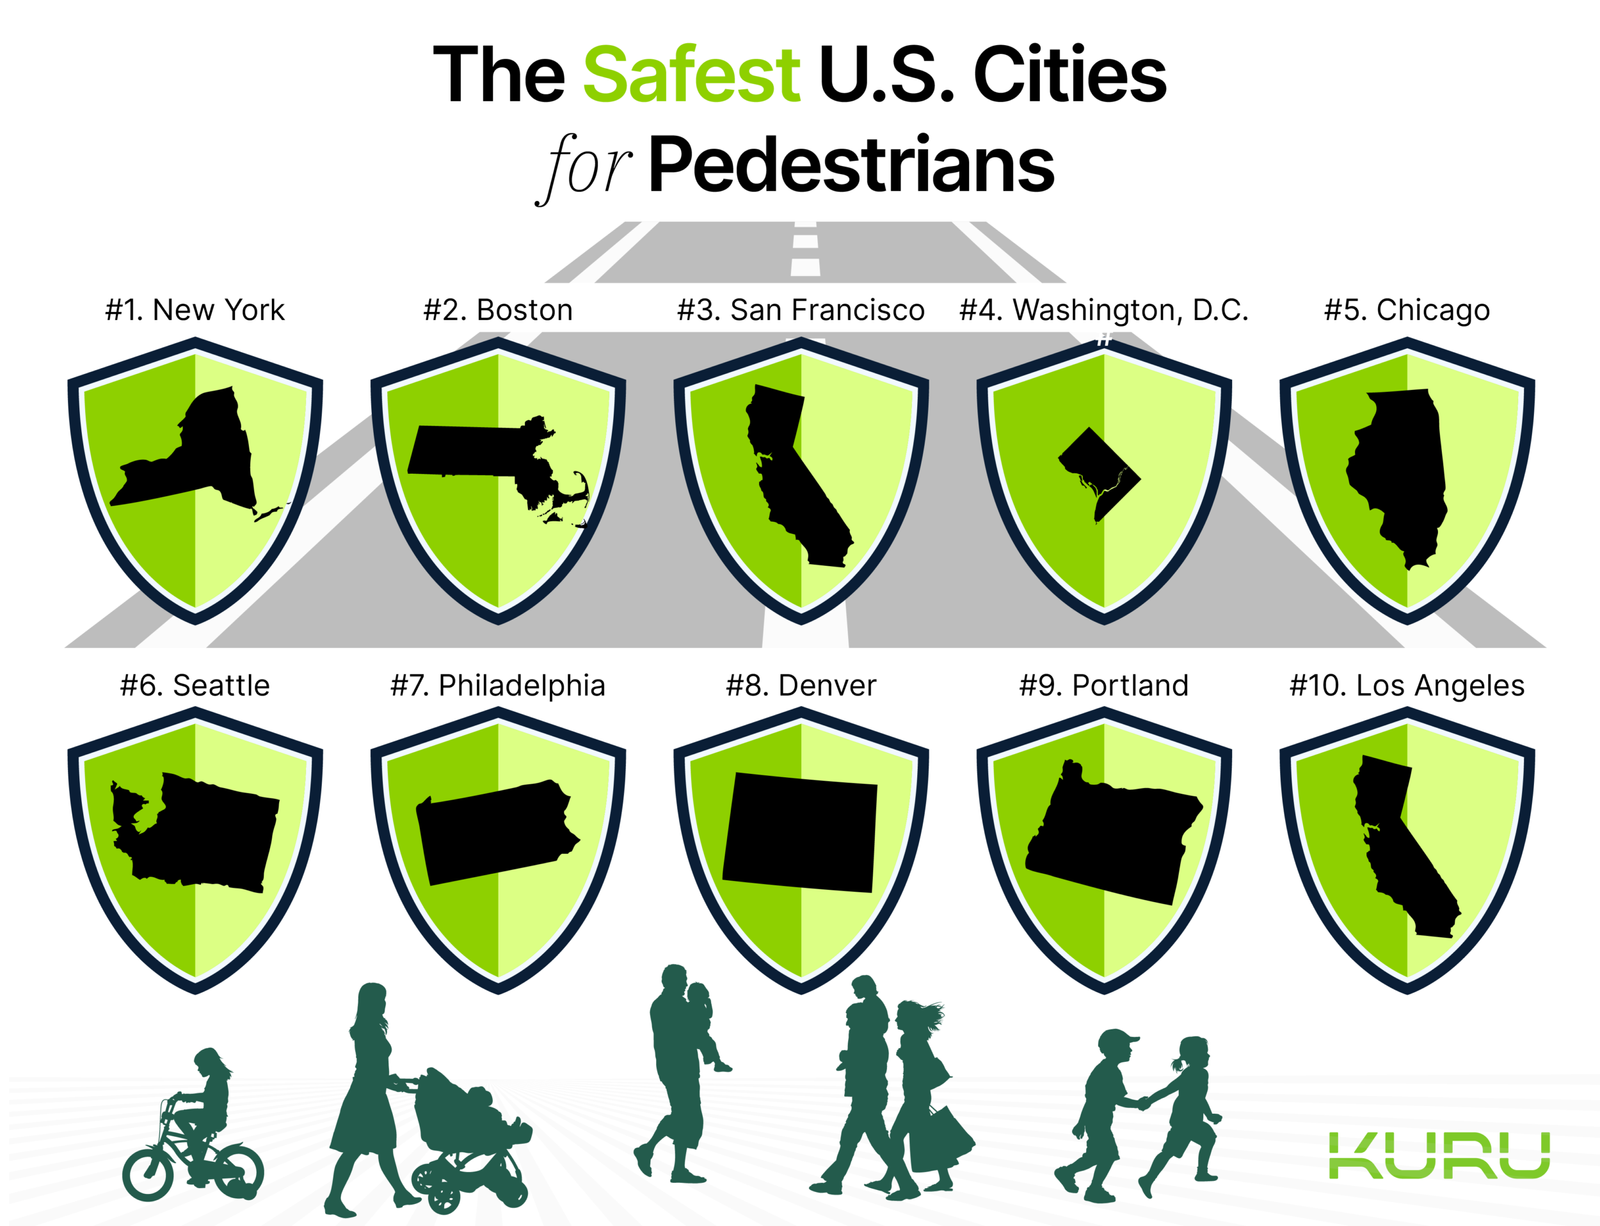 An illustration of the top 10 safest cities for pedestrians, matching the data in a table below.